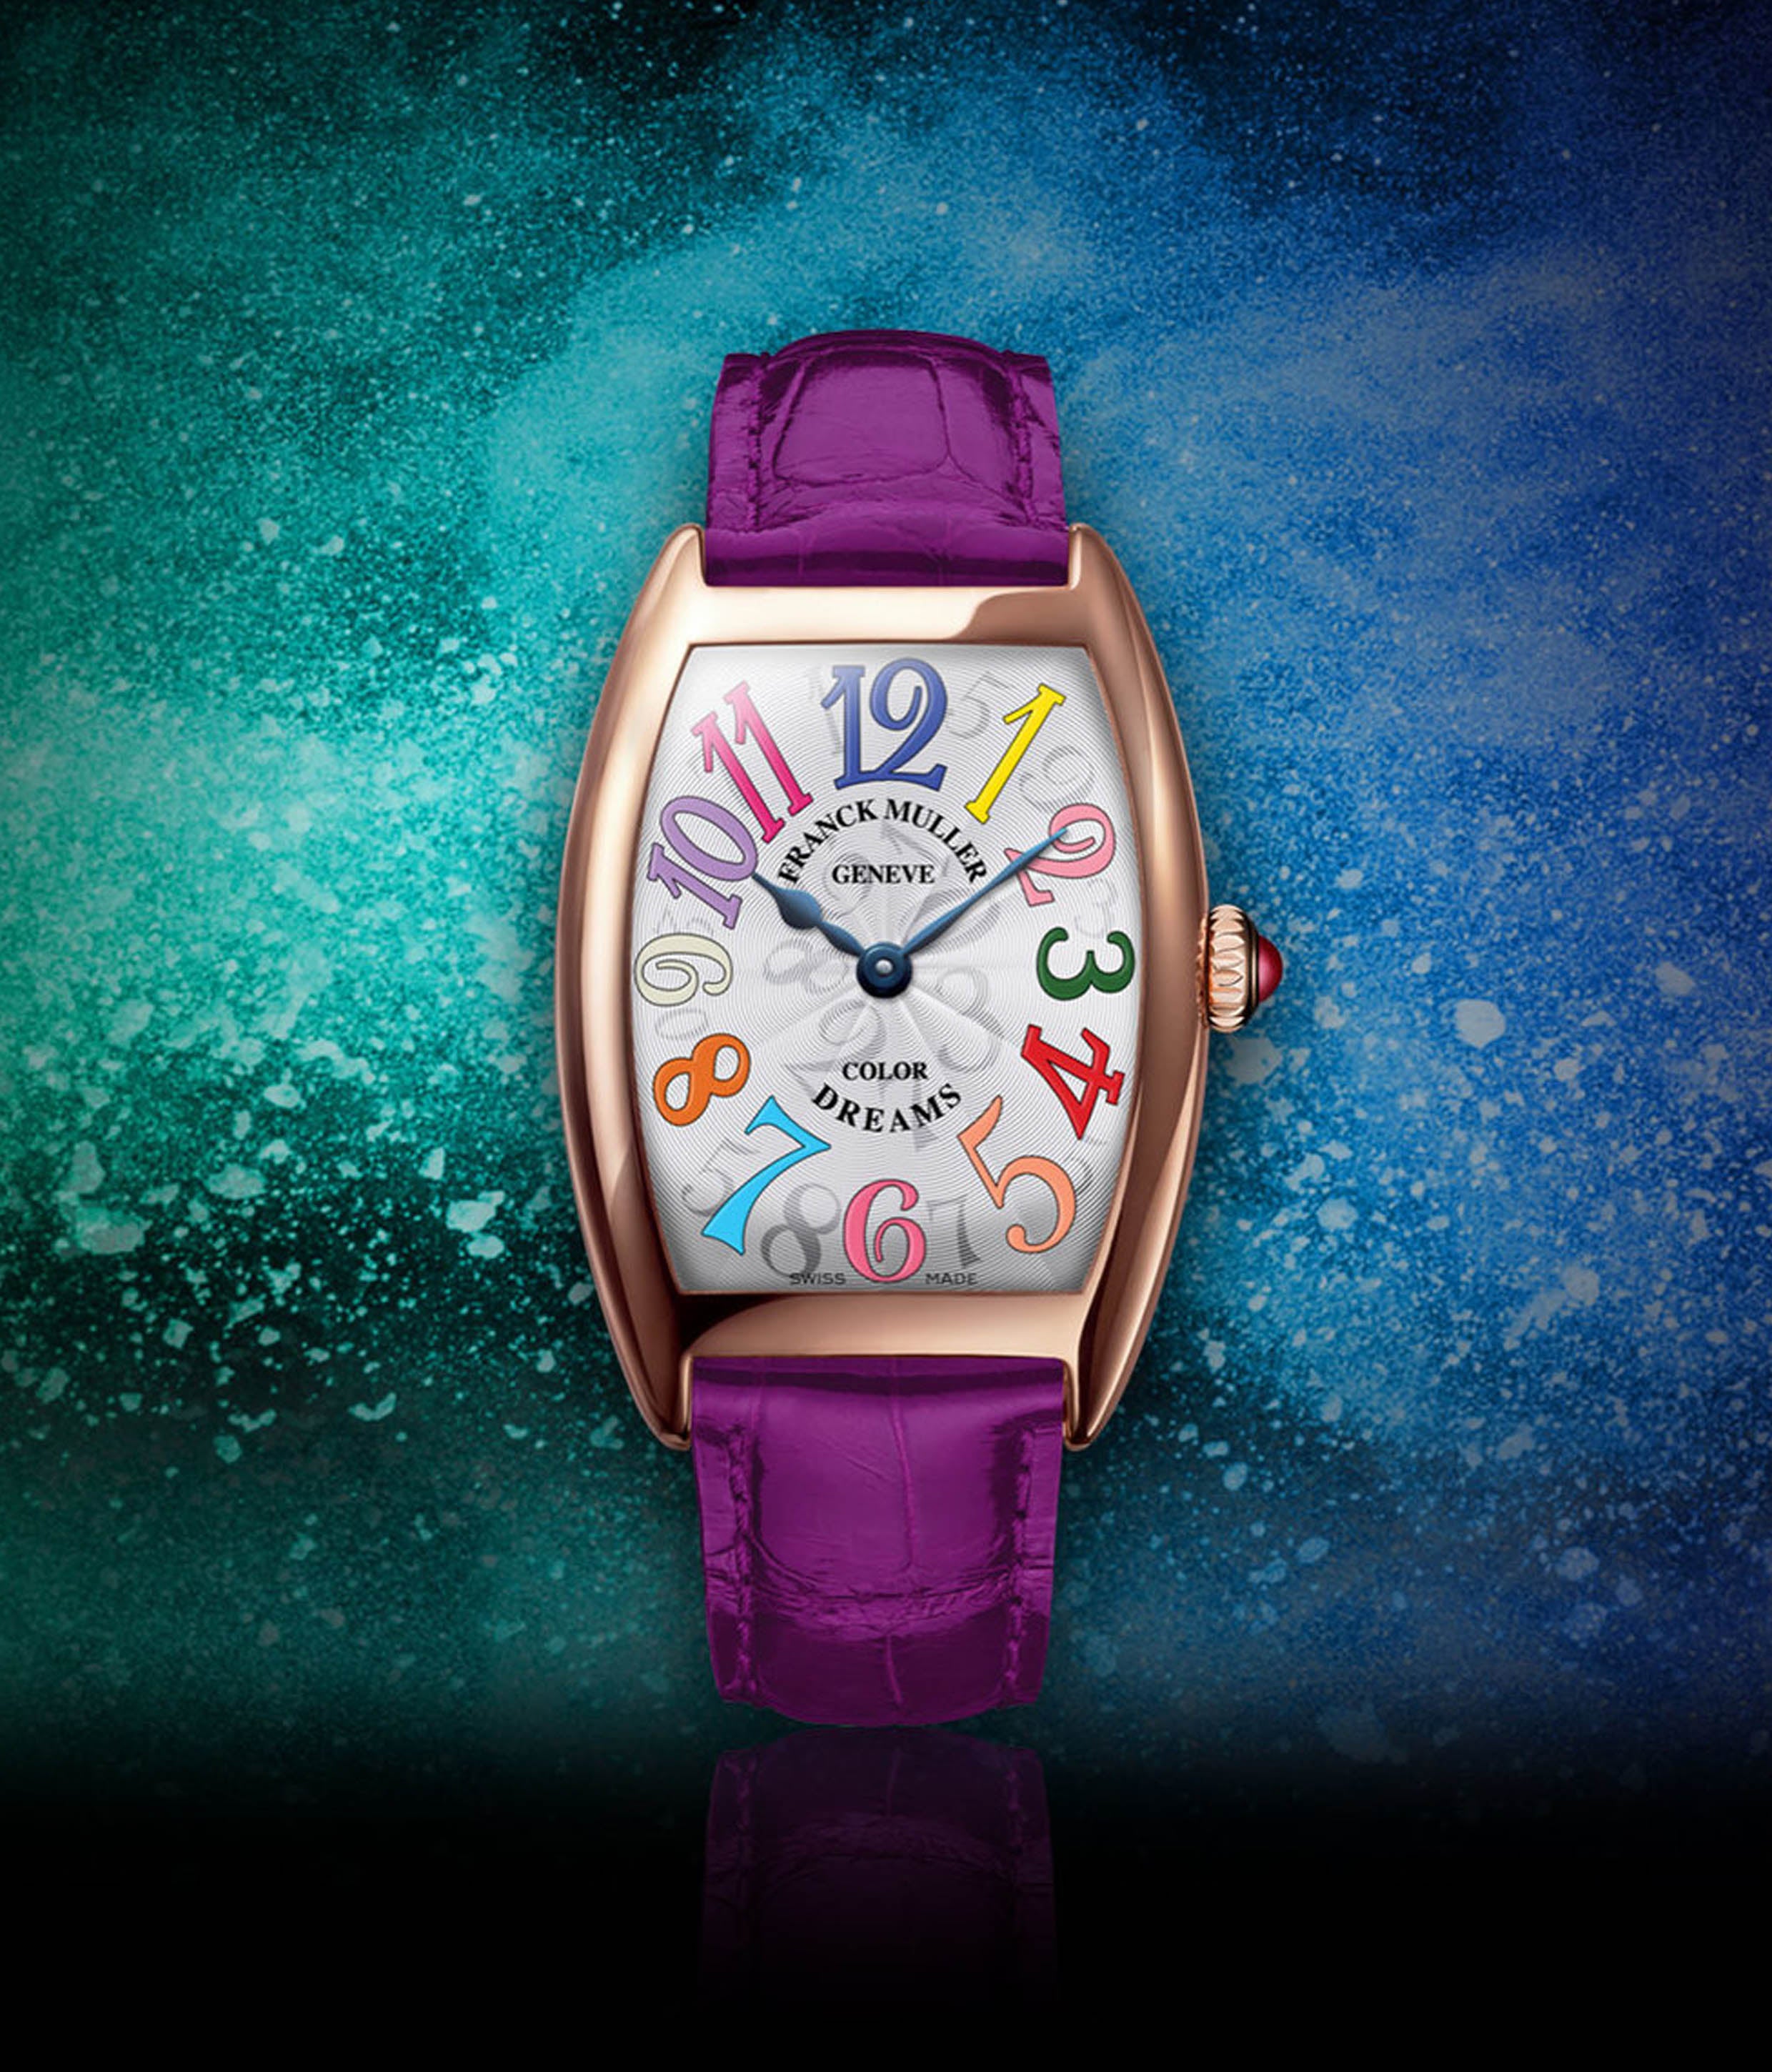 Color Dreams Timepiece Lifestyle Shot by Franck Muller